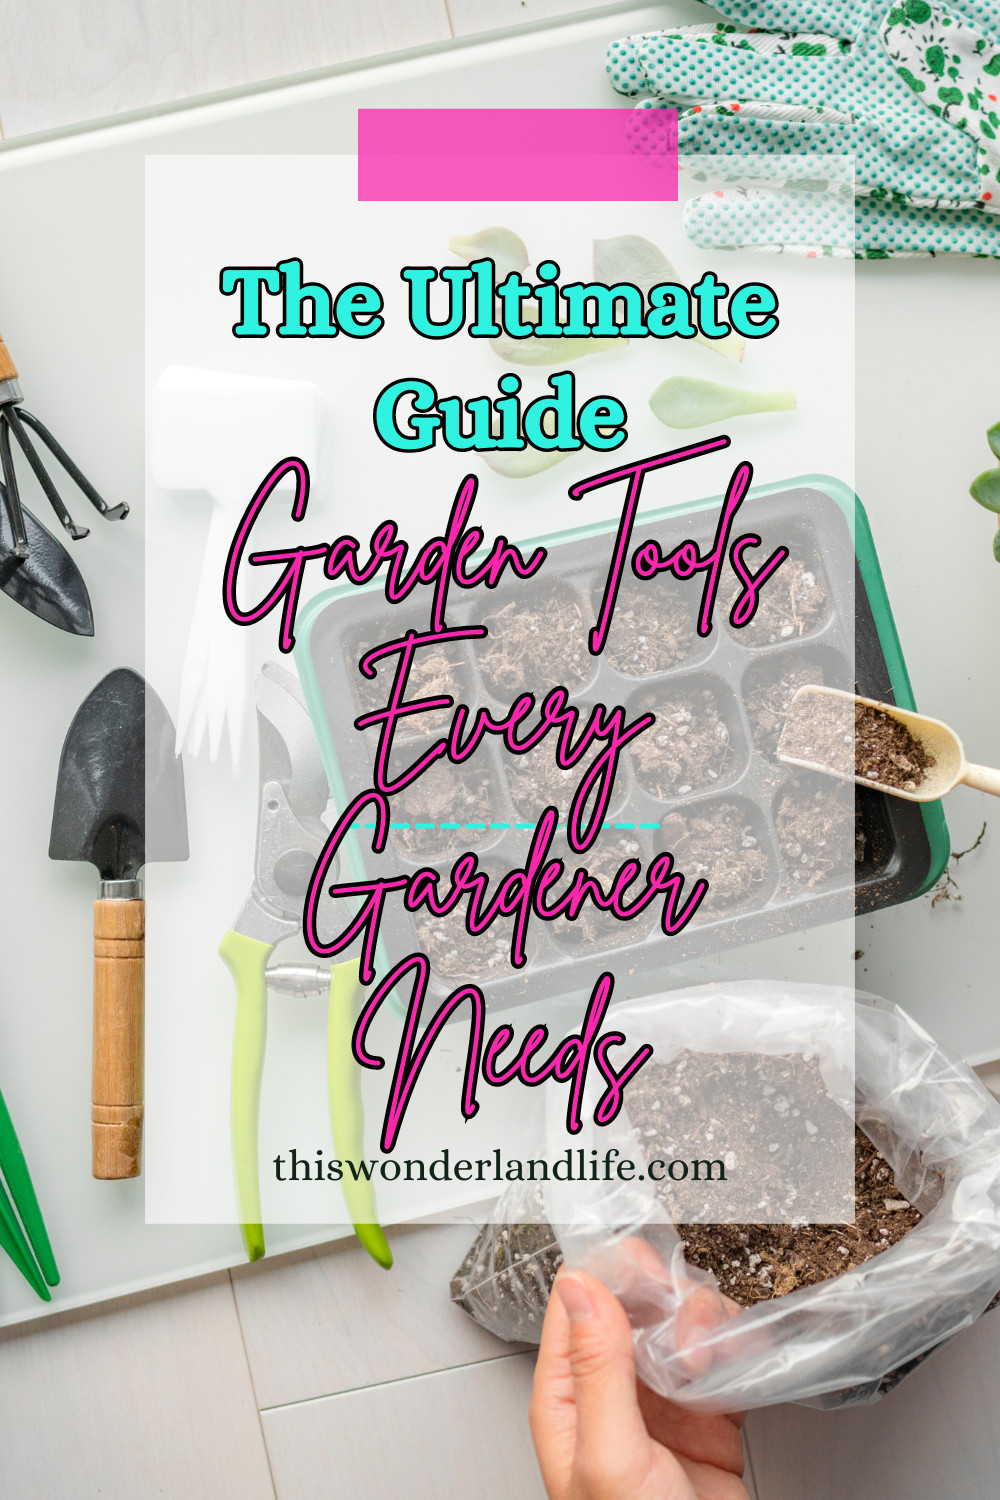 The Ultimate Guide to What Every Home Gardener Needs